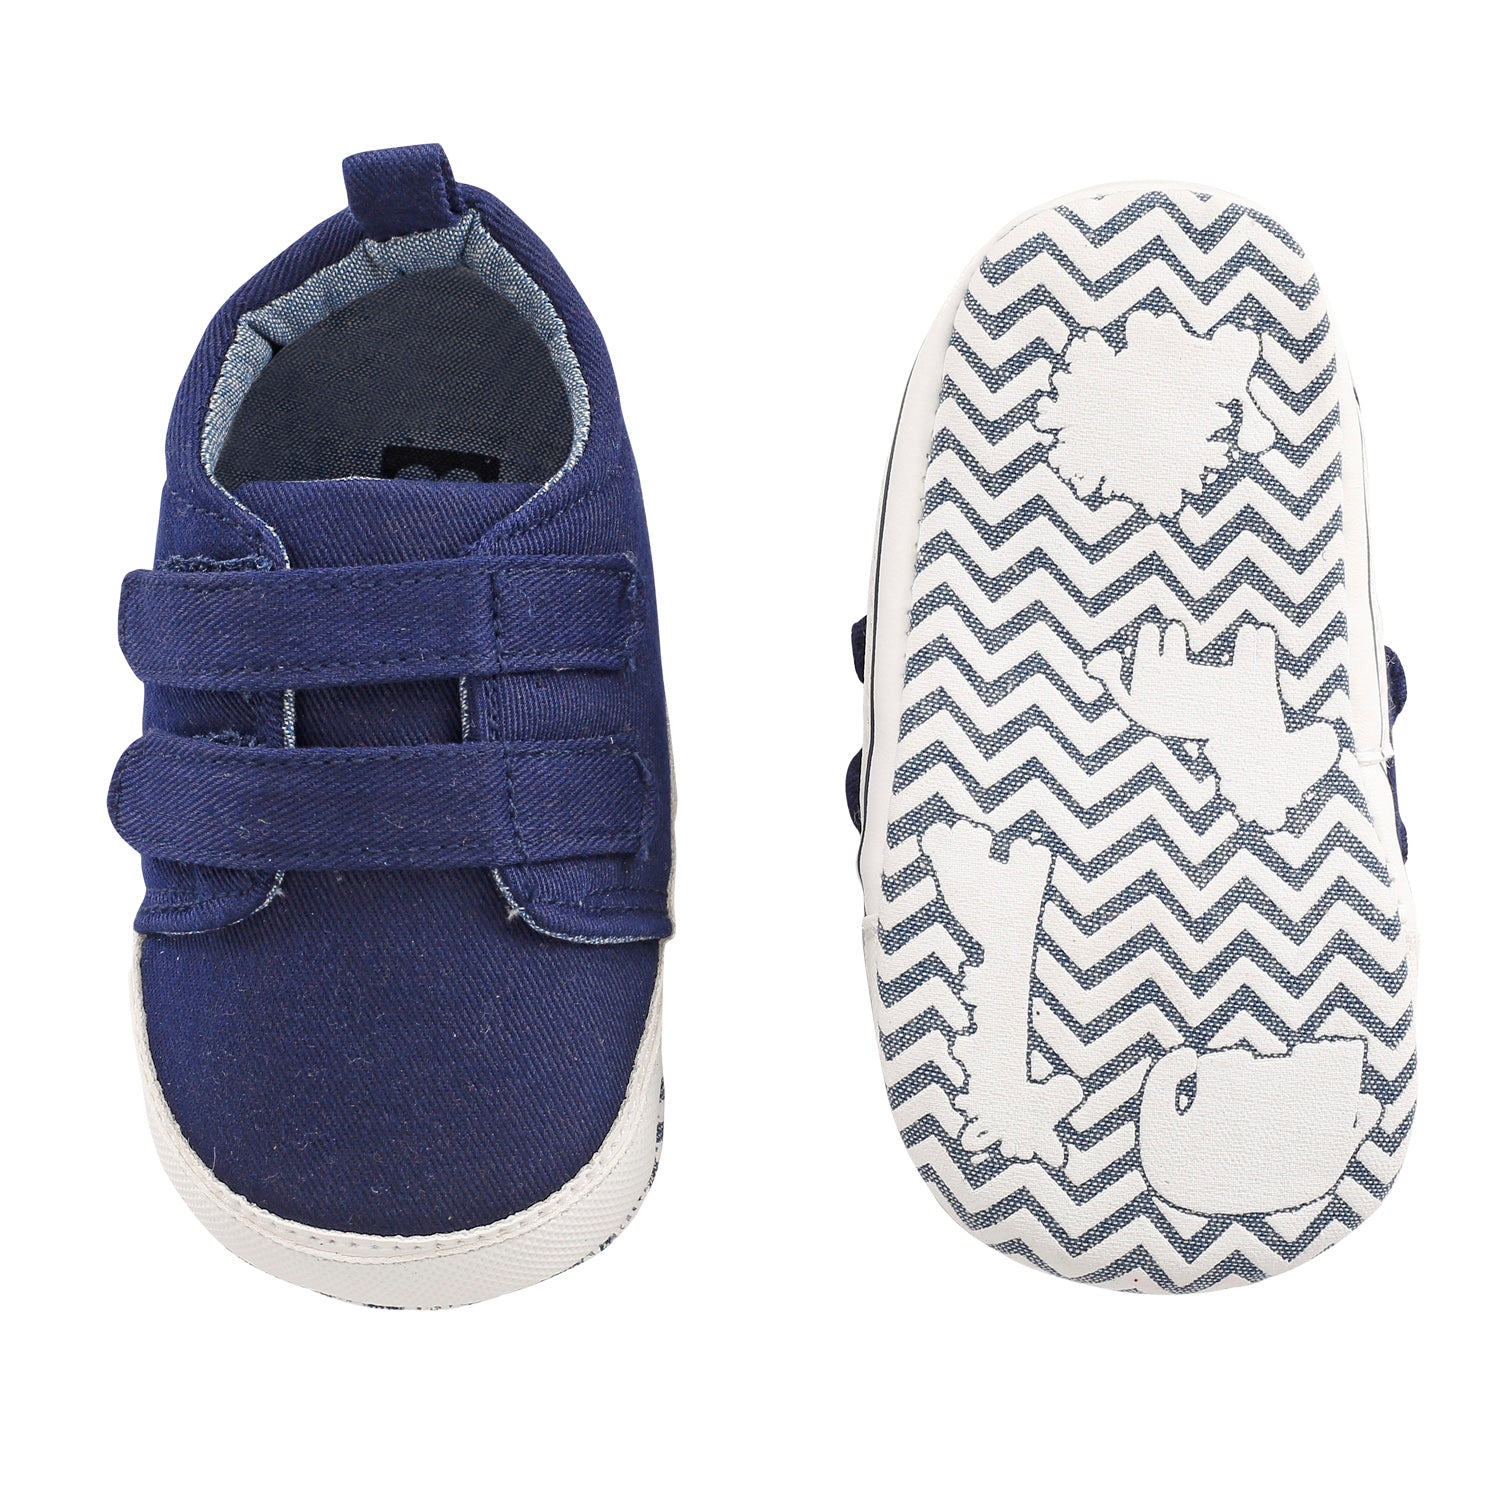 Navy Blue Casual Booties - Baby Moo